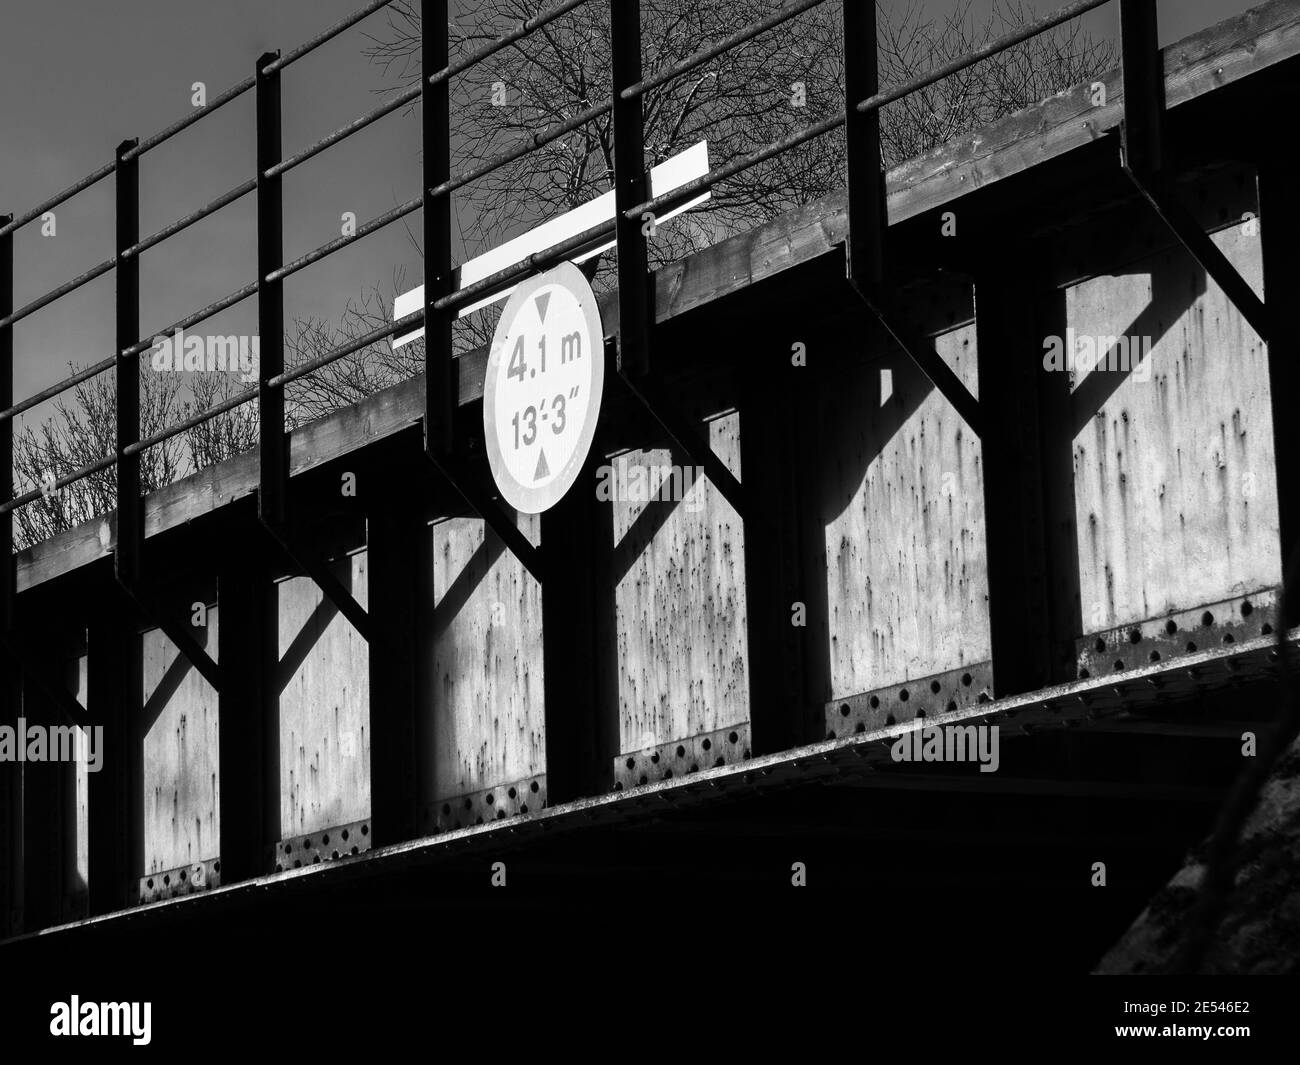 Monochrome image of a railway bridge full of lines, angles and shadows. Stock Photo